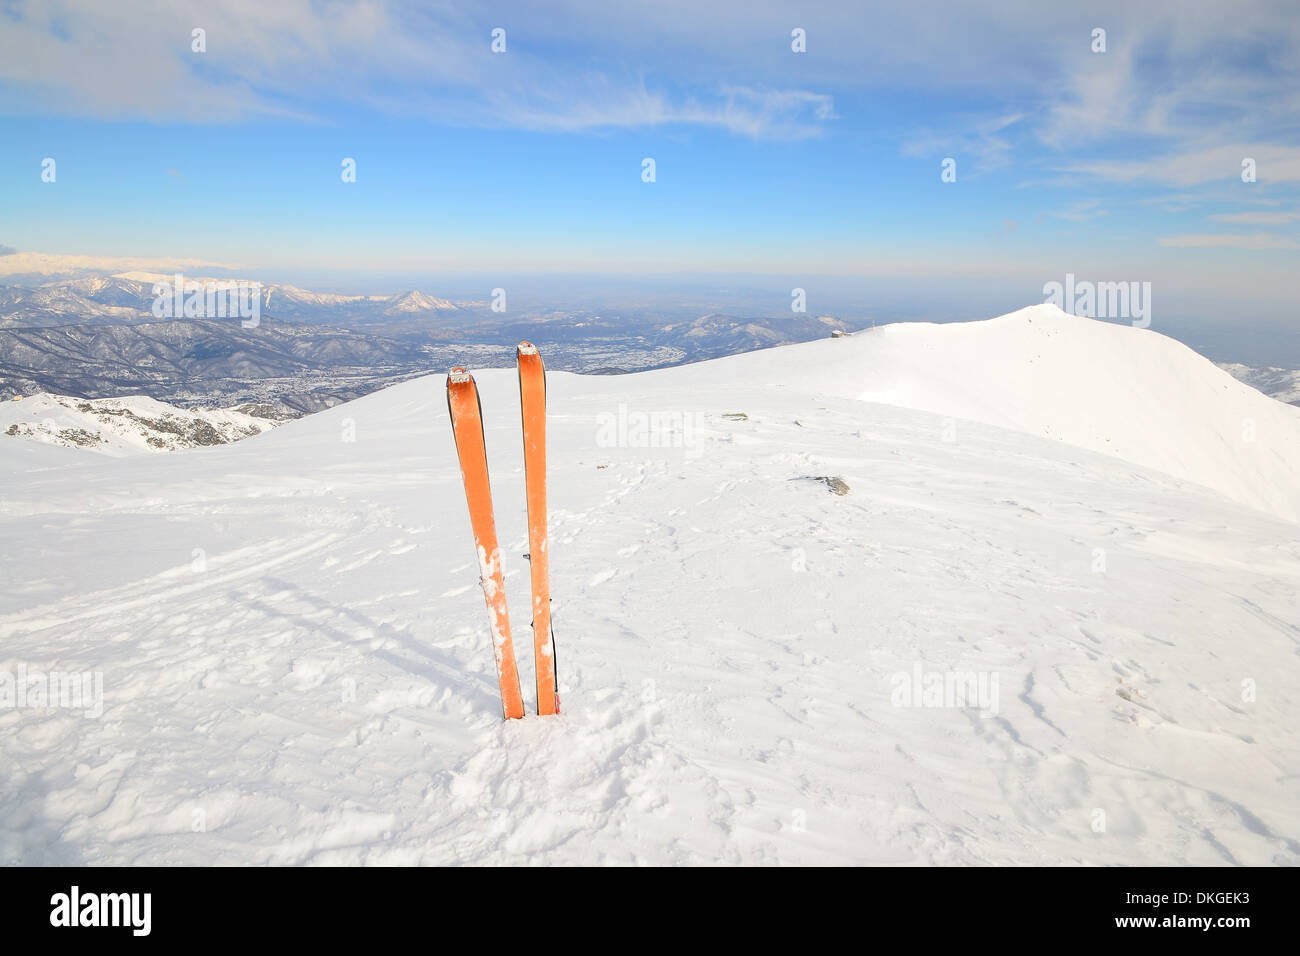 On the mountain summit, tour ski and back country skiing equipment with avalanche safety tools Stock Photo